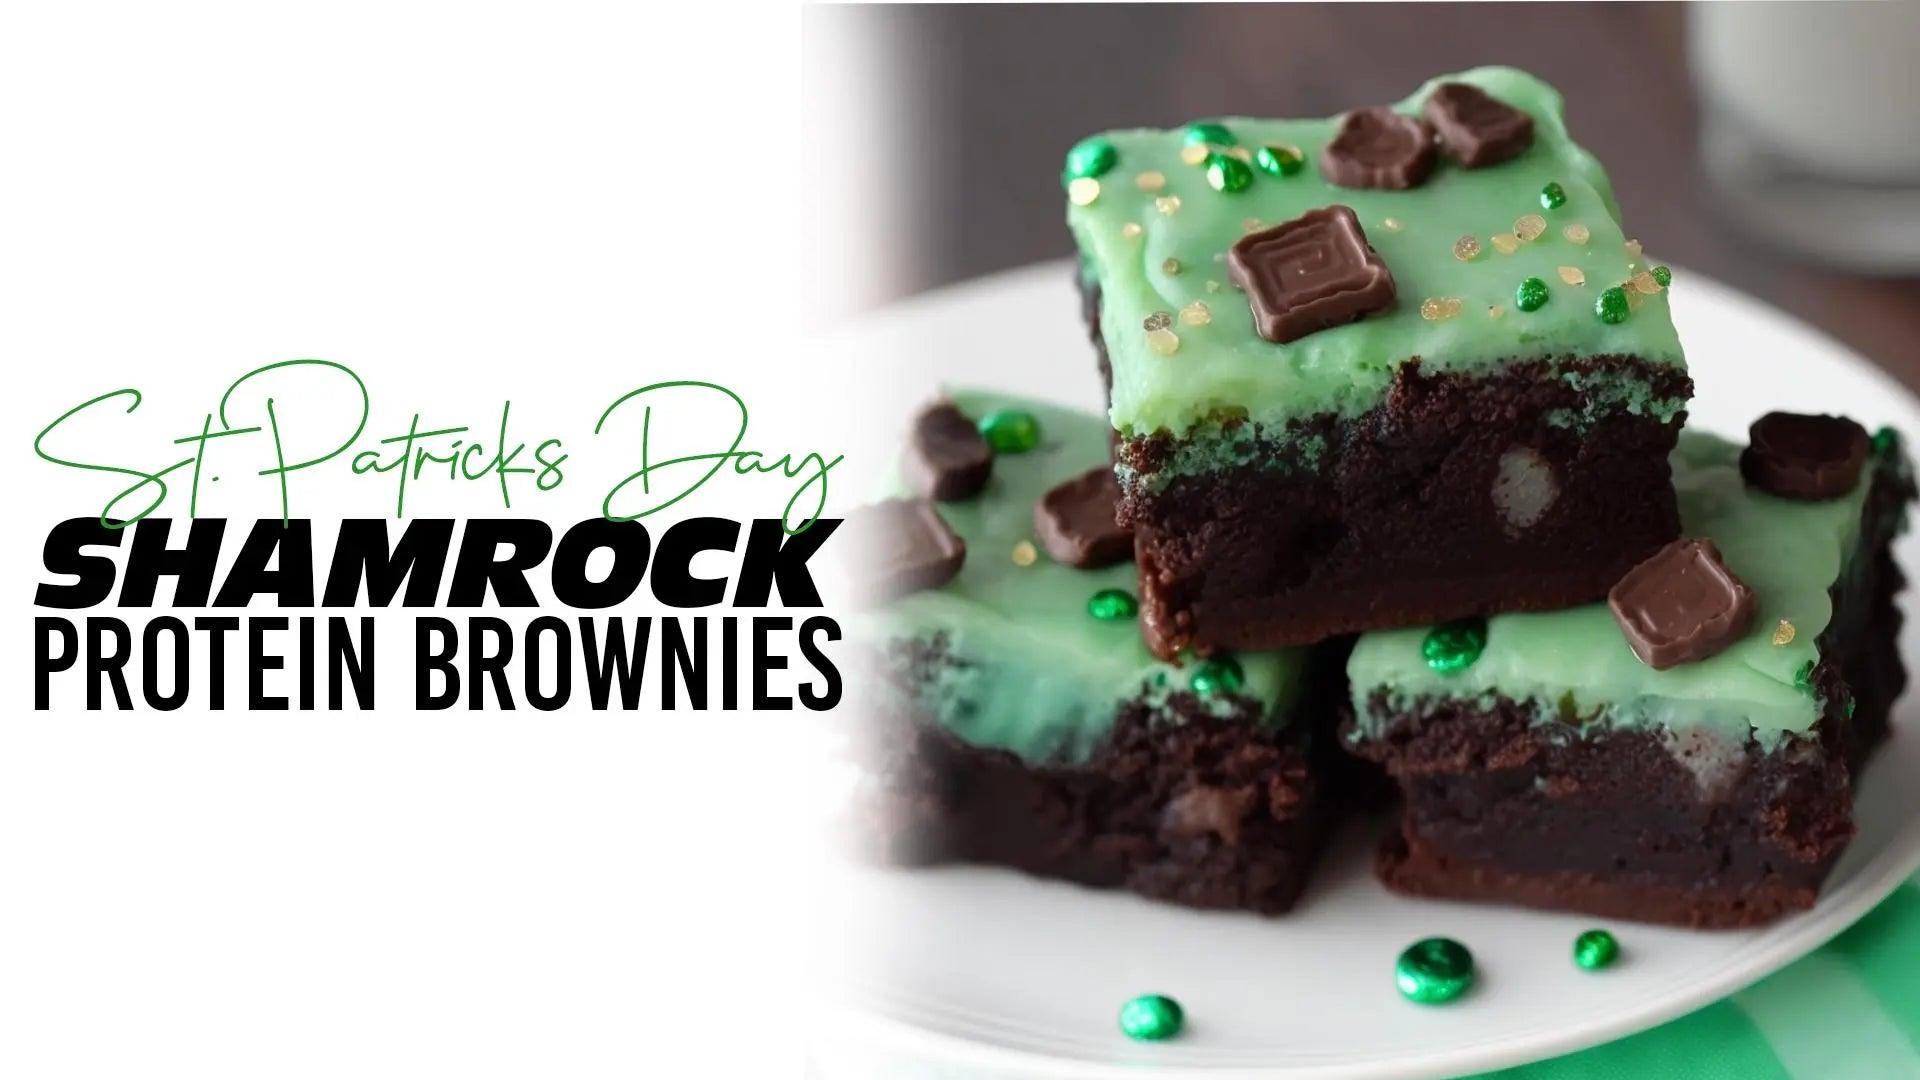 St.-Patrick-s-Day-Shamrock-Protein-Brownies UXO Supplements